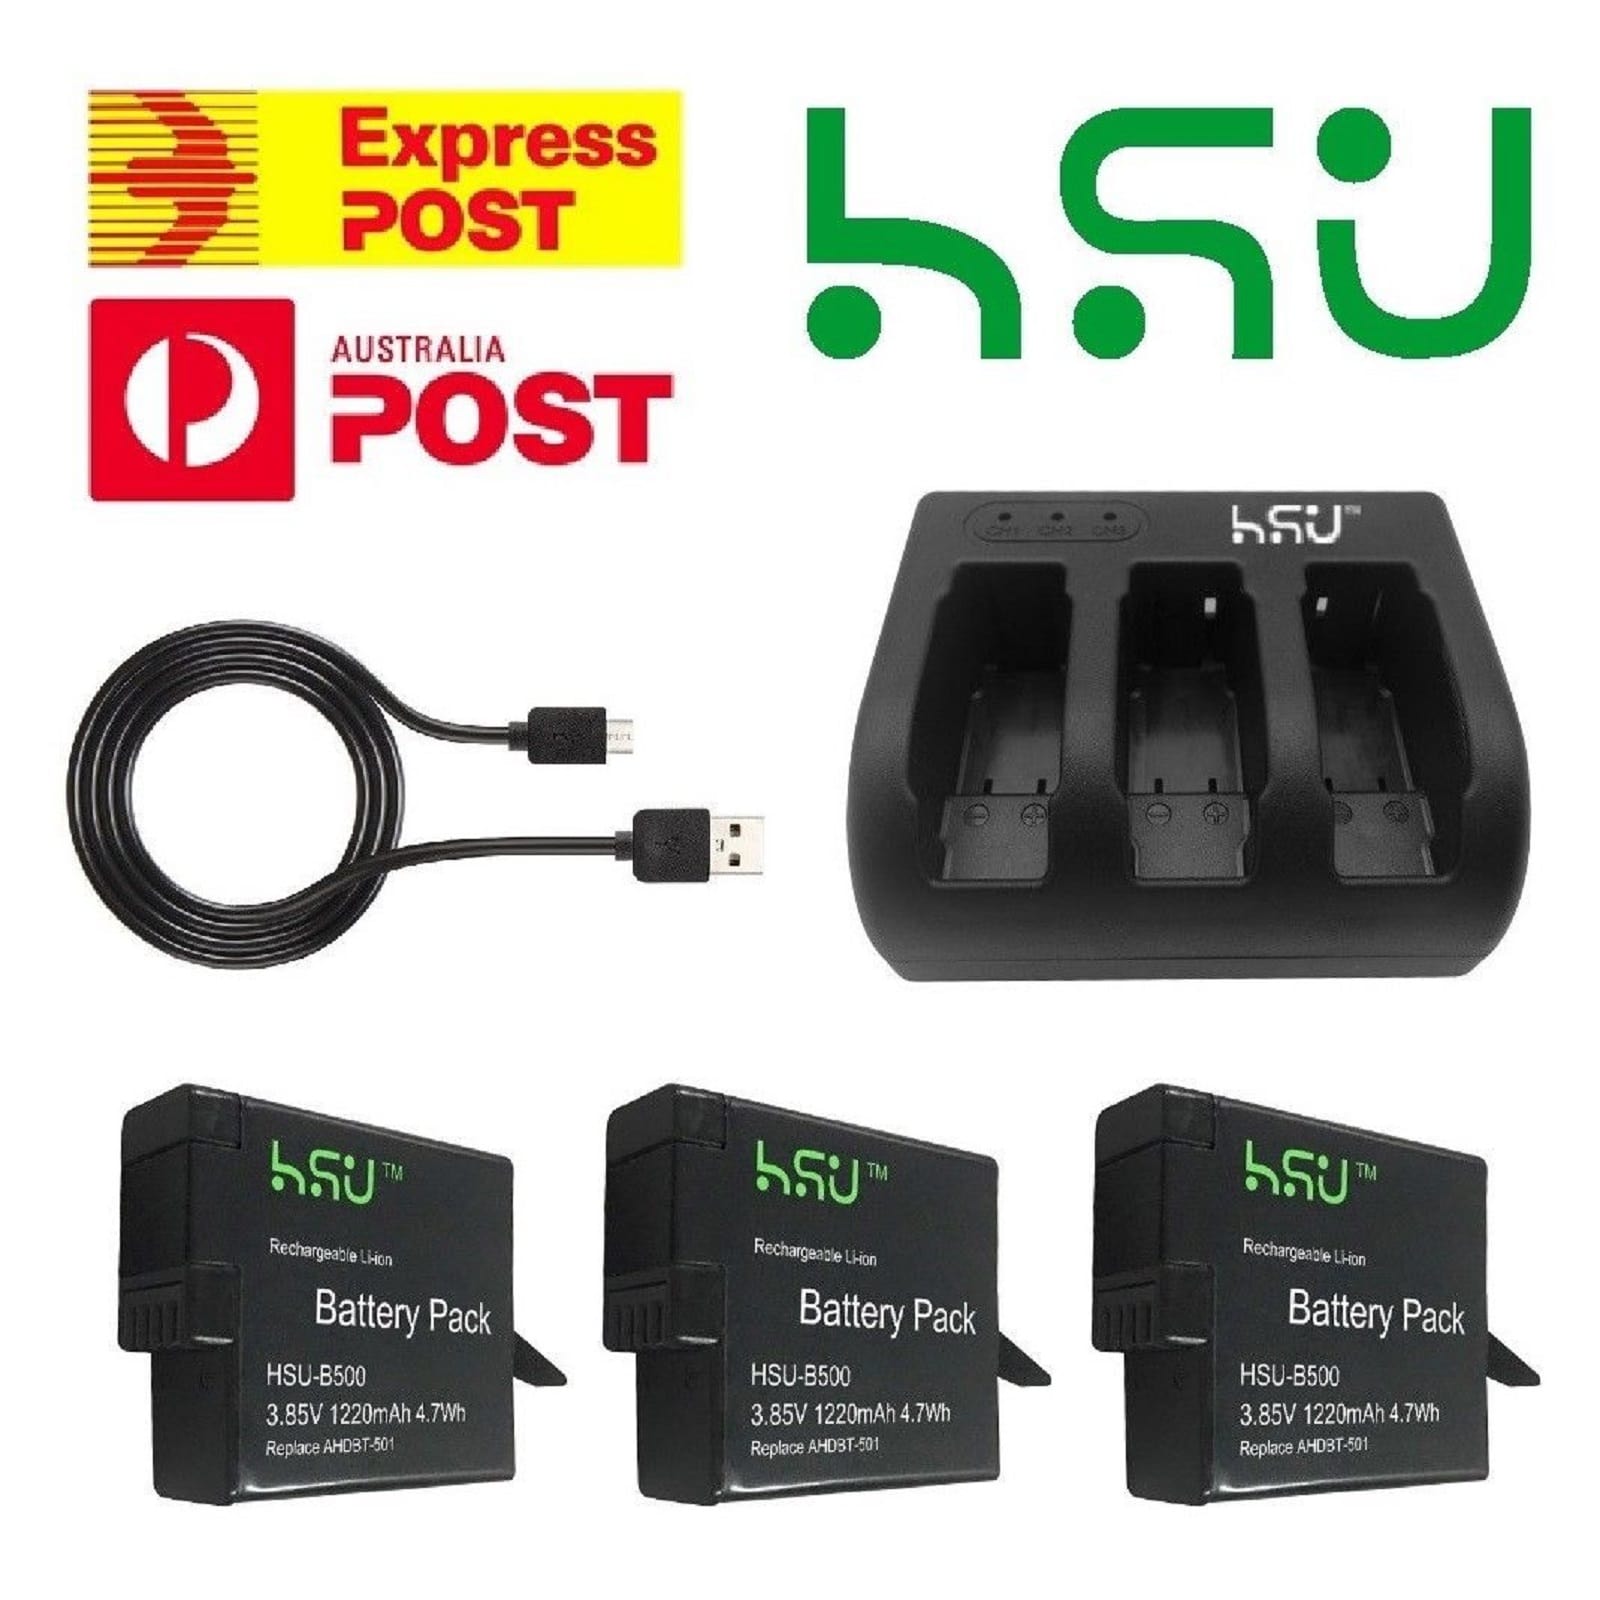 HSU Battery Set Kit with USB Charger for GoPro HERO 3 4 5 6 & 7